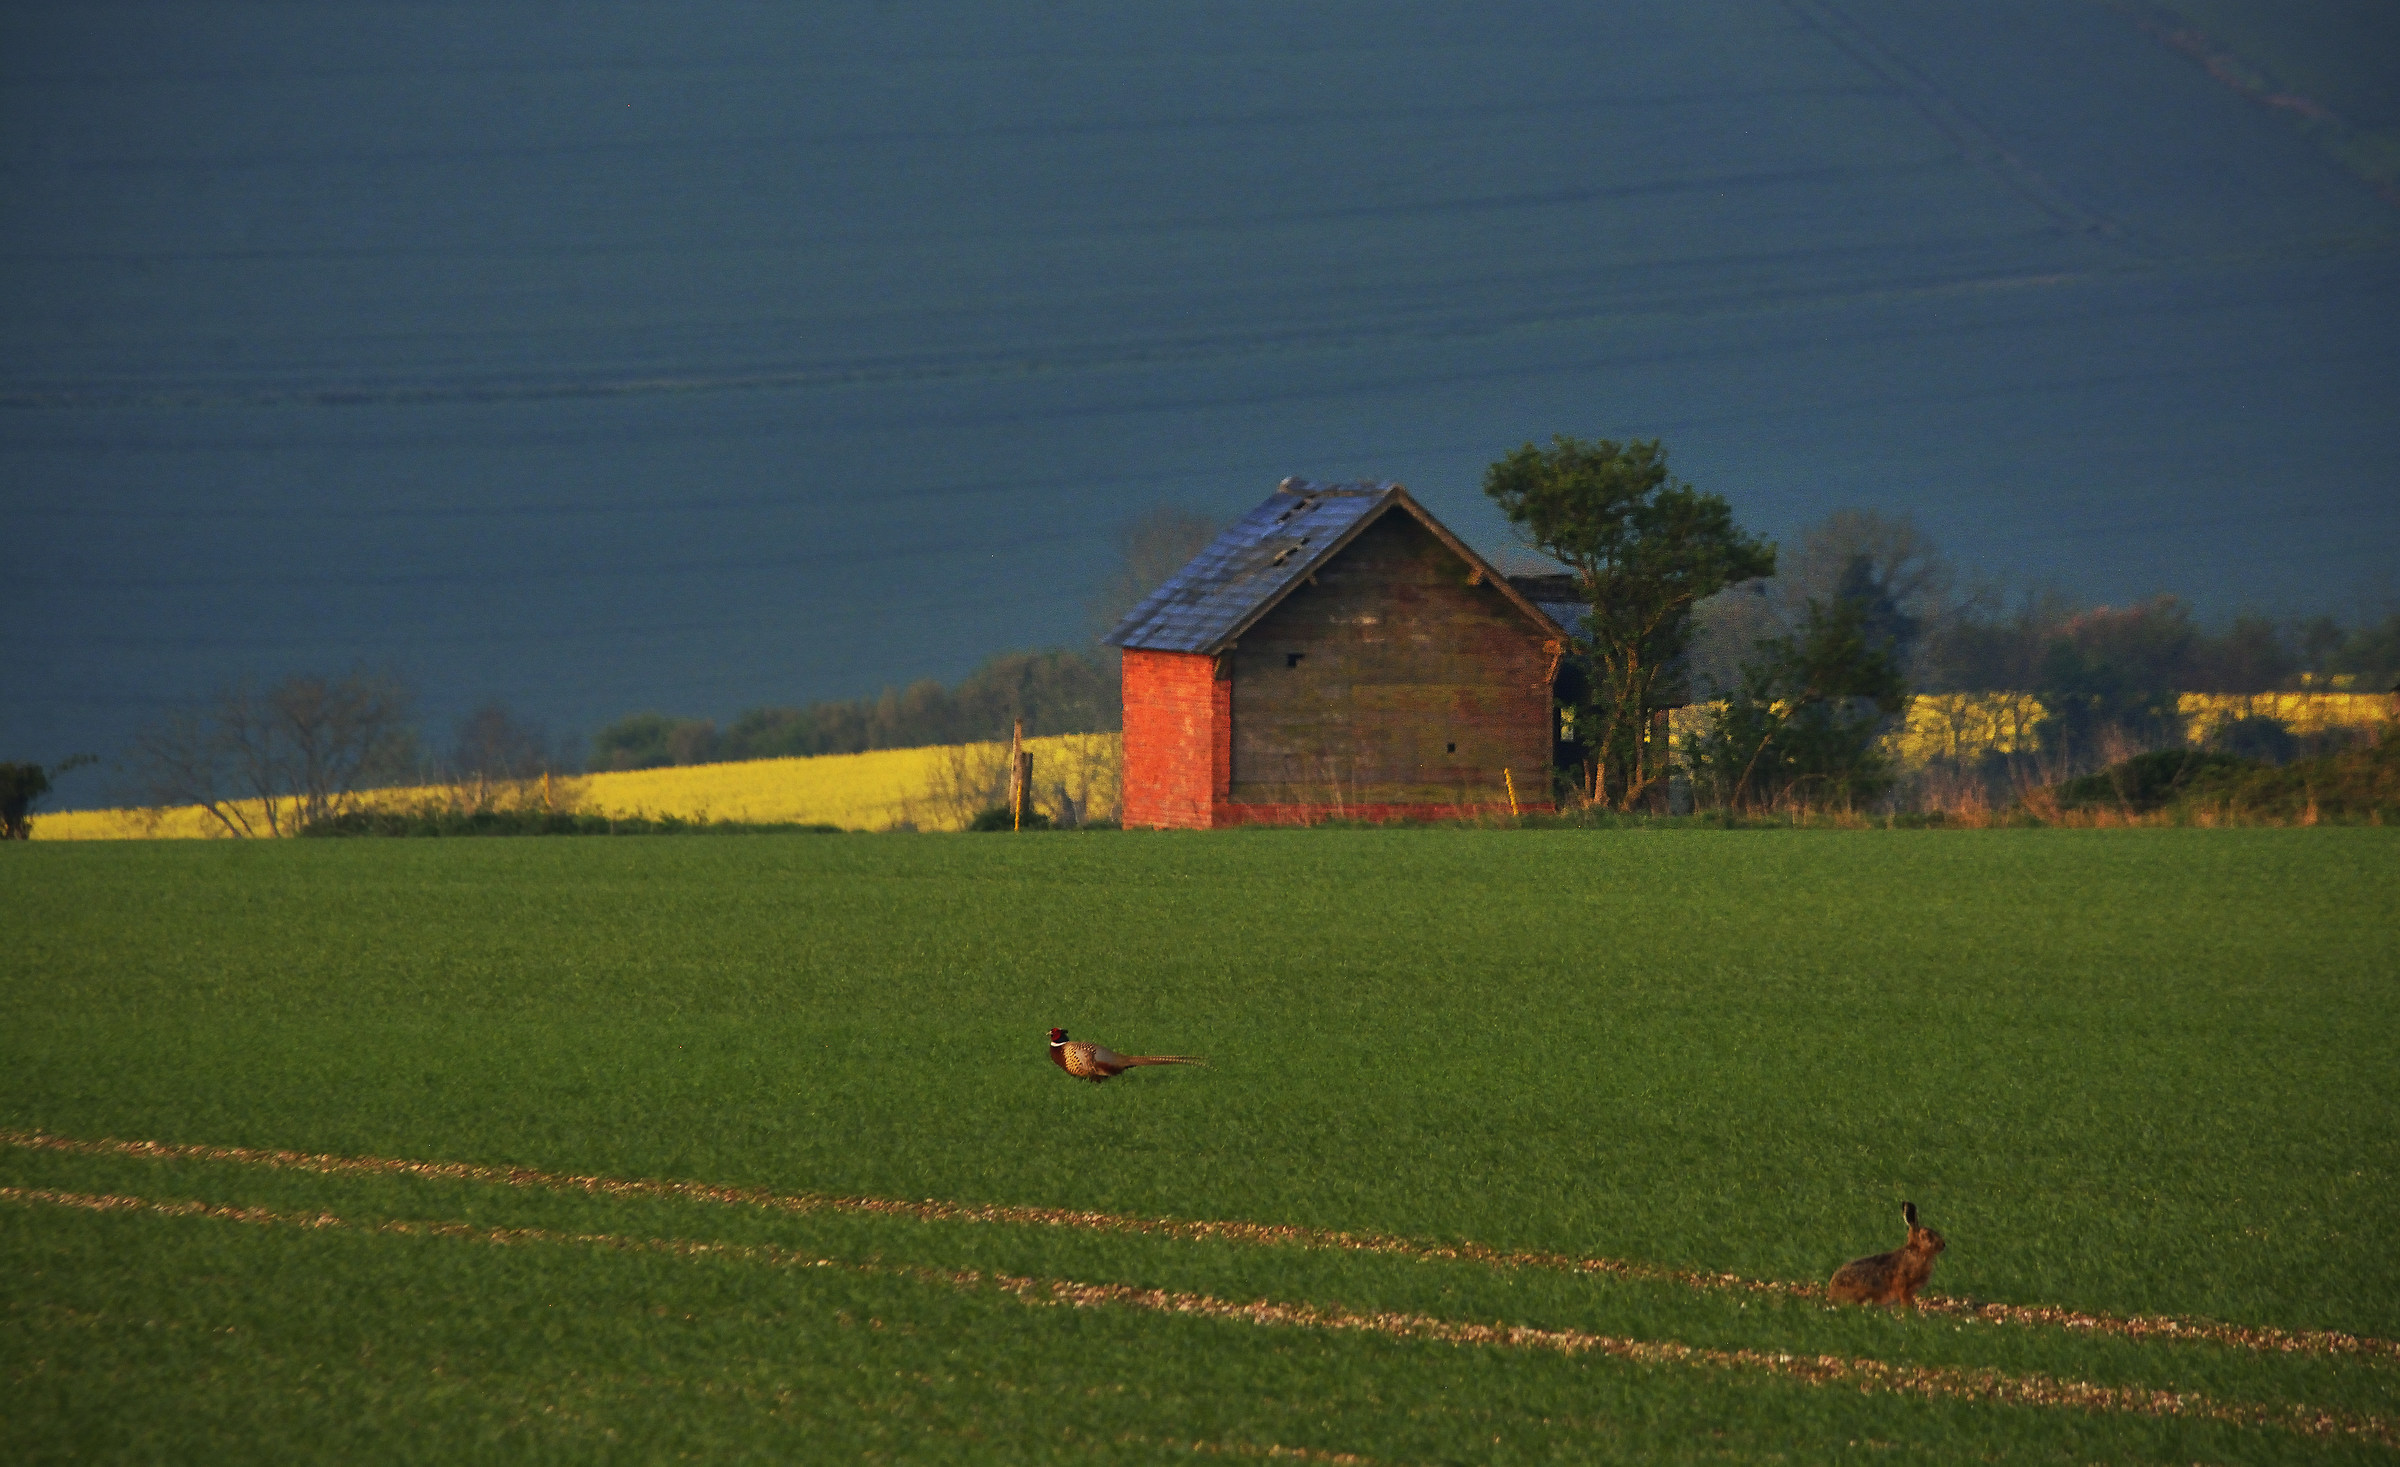 The Hare, The Pheasant & the Red Barn...